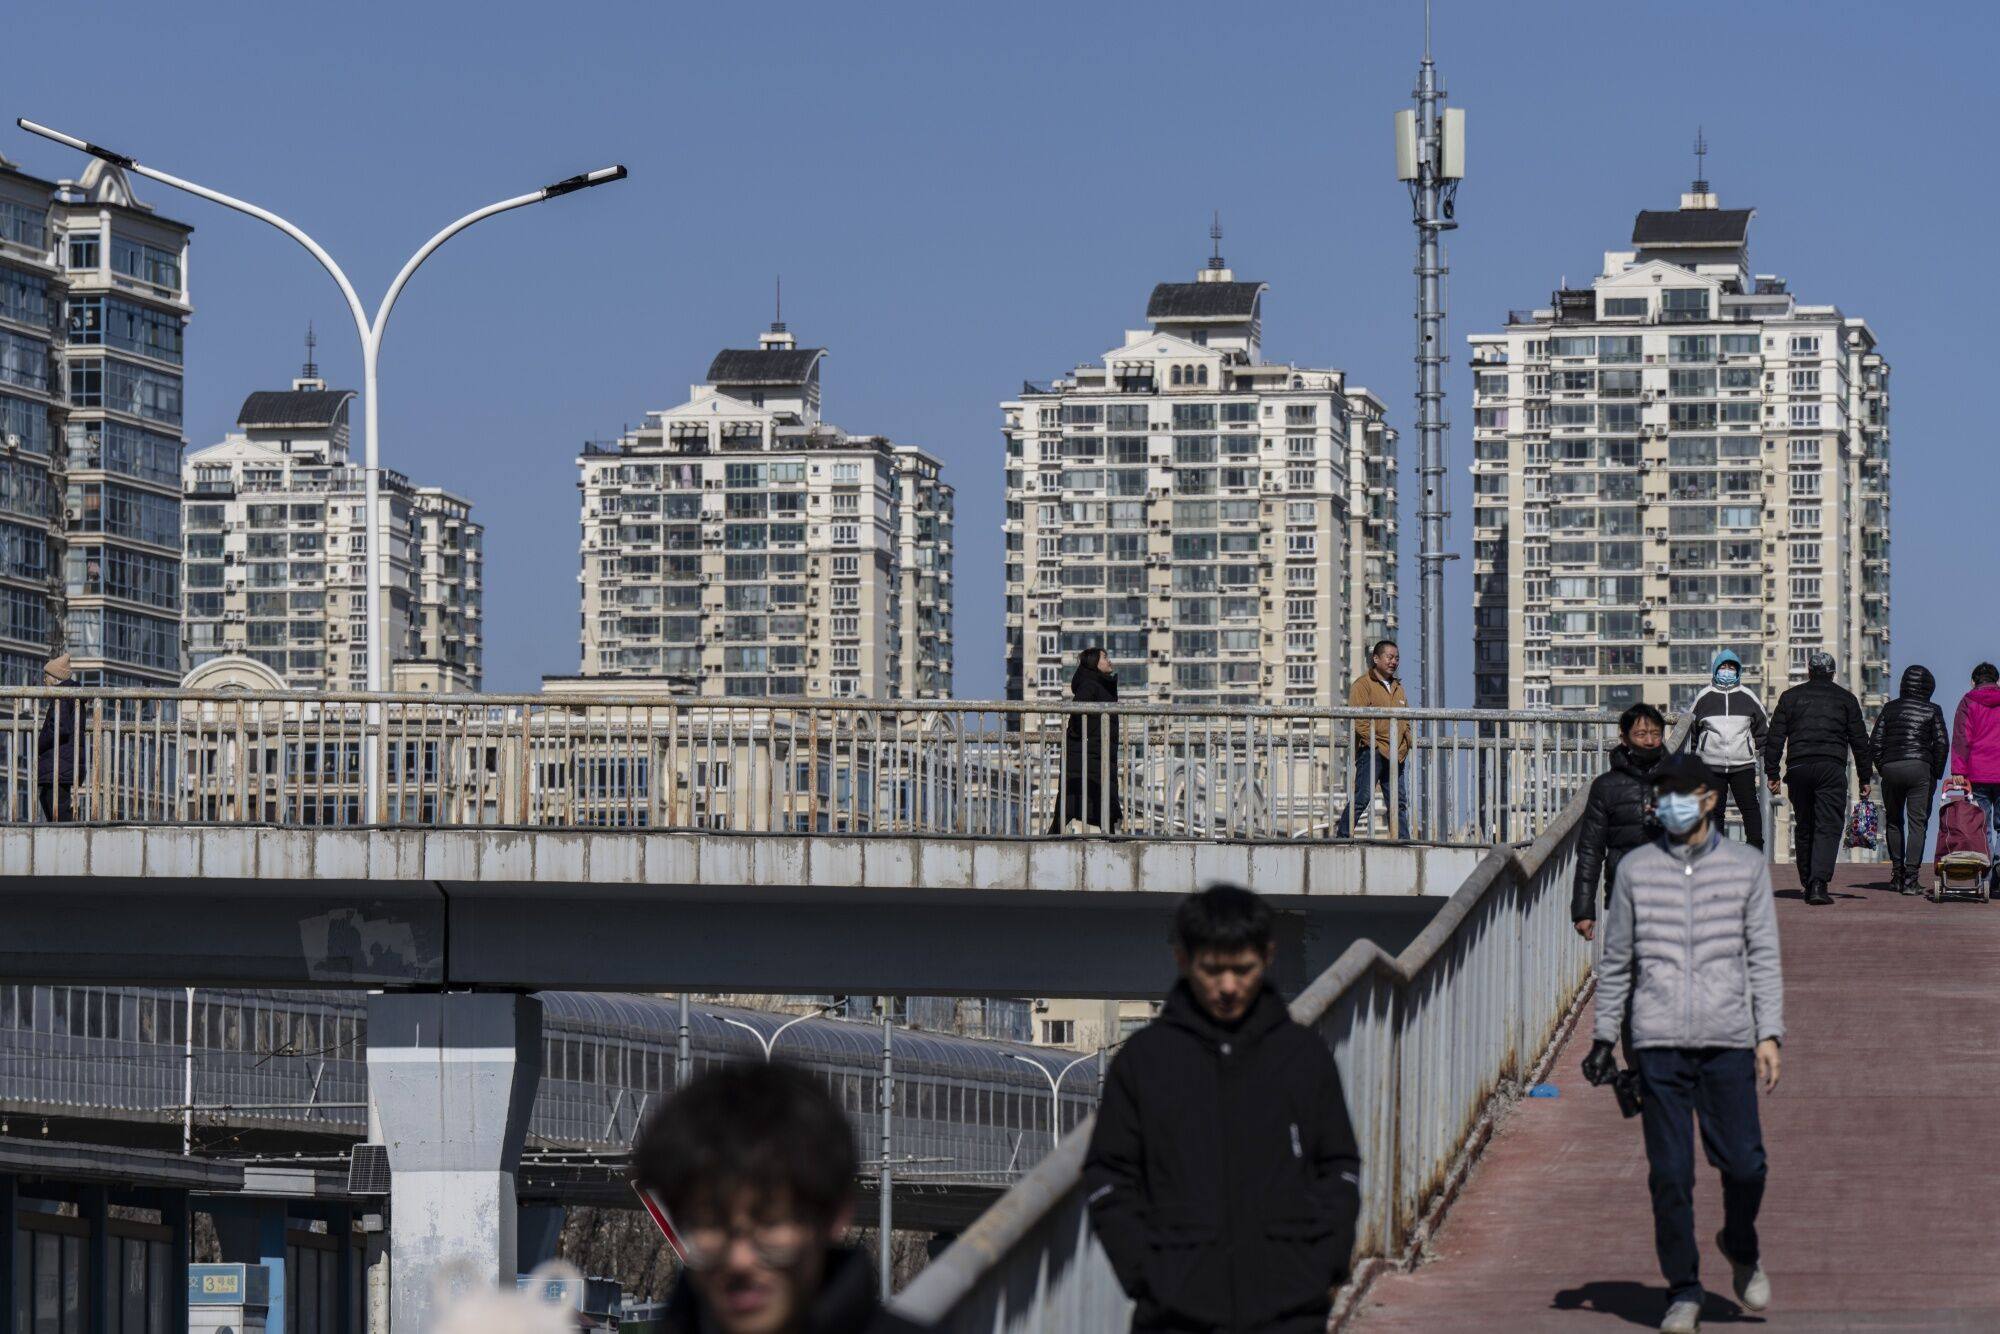 The task of stabilising China’s property market remains arduous, according to the country’s housing minister. Photo: Bloomberg